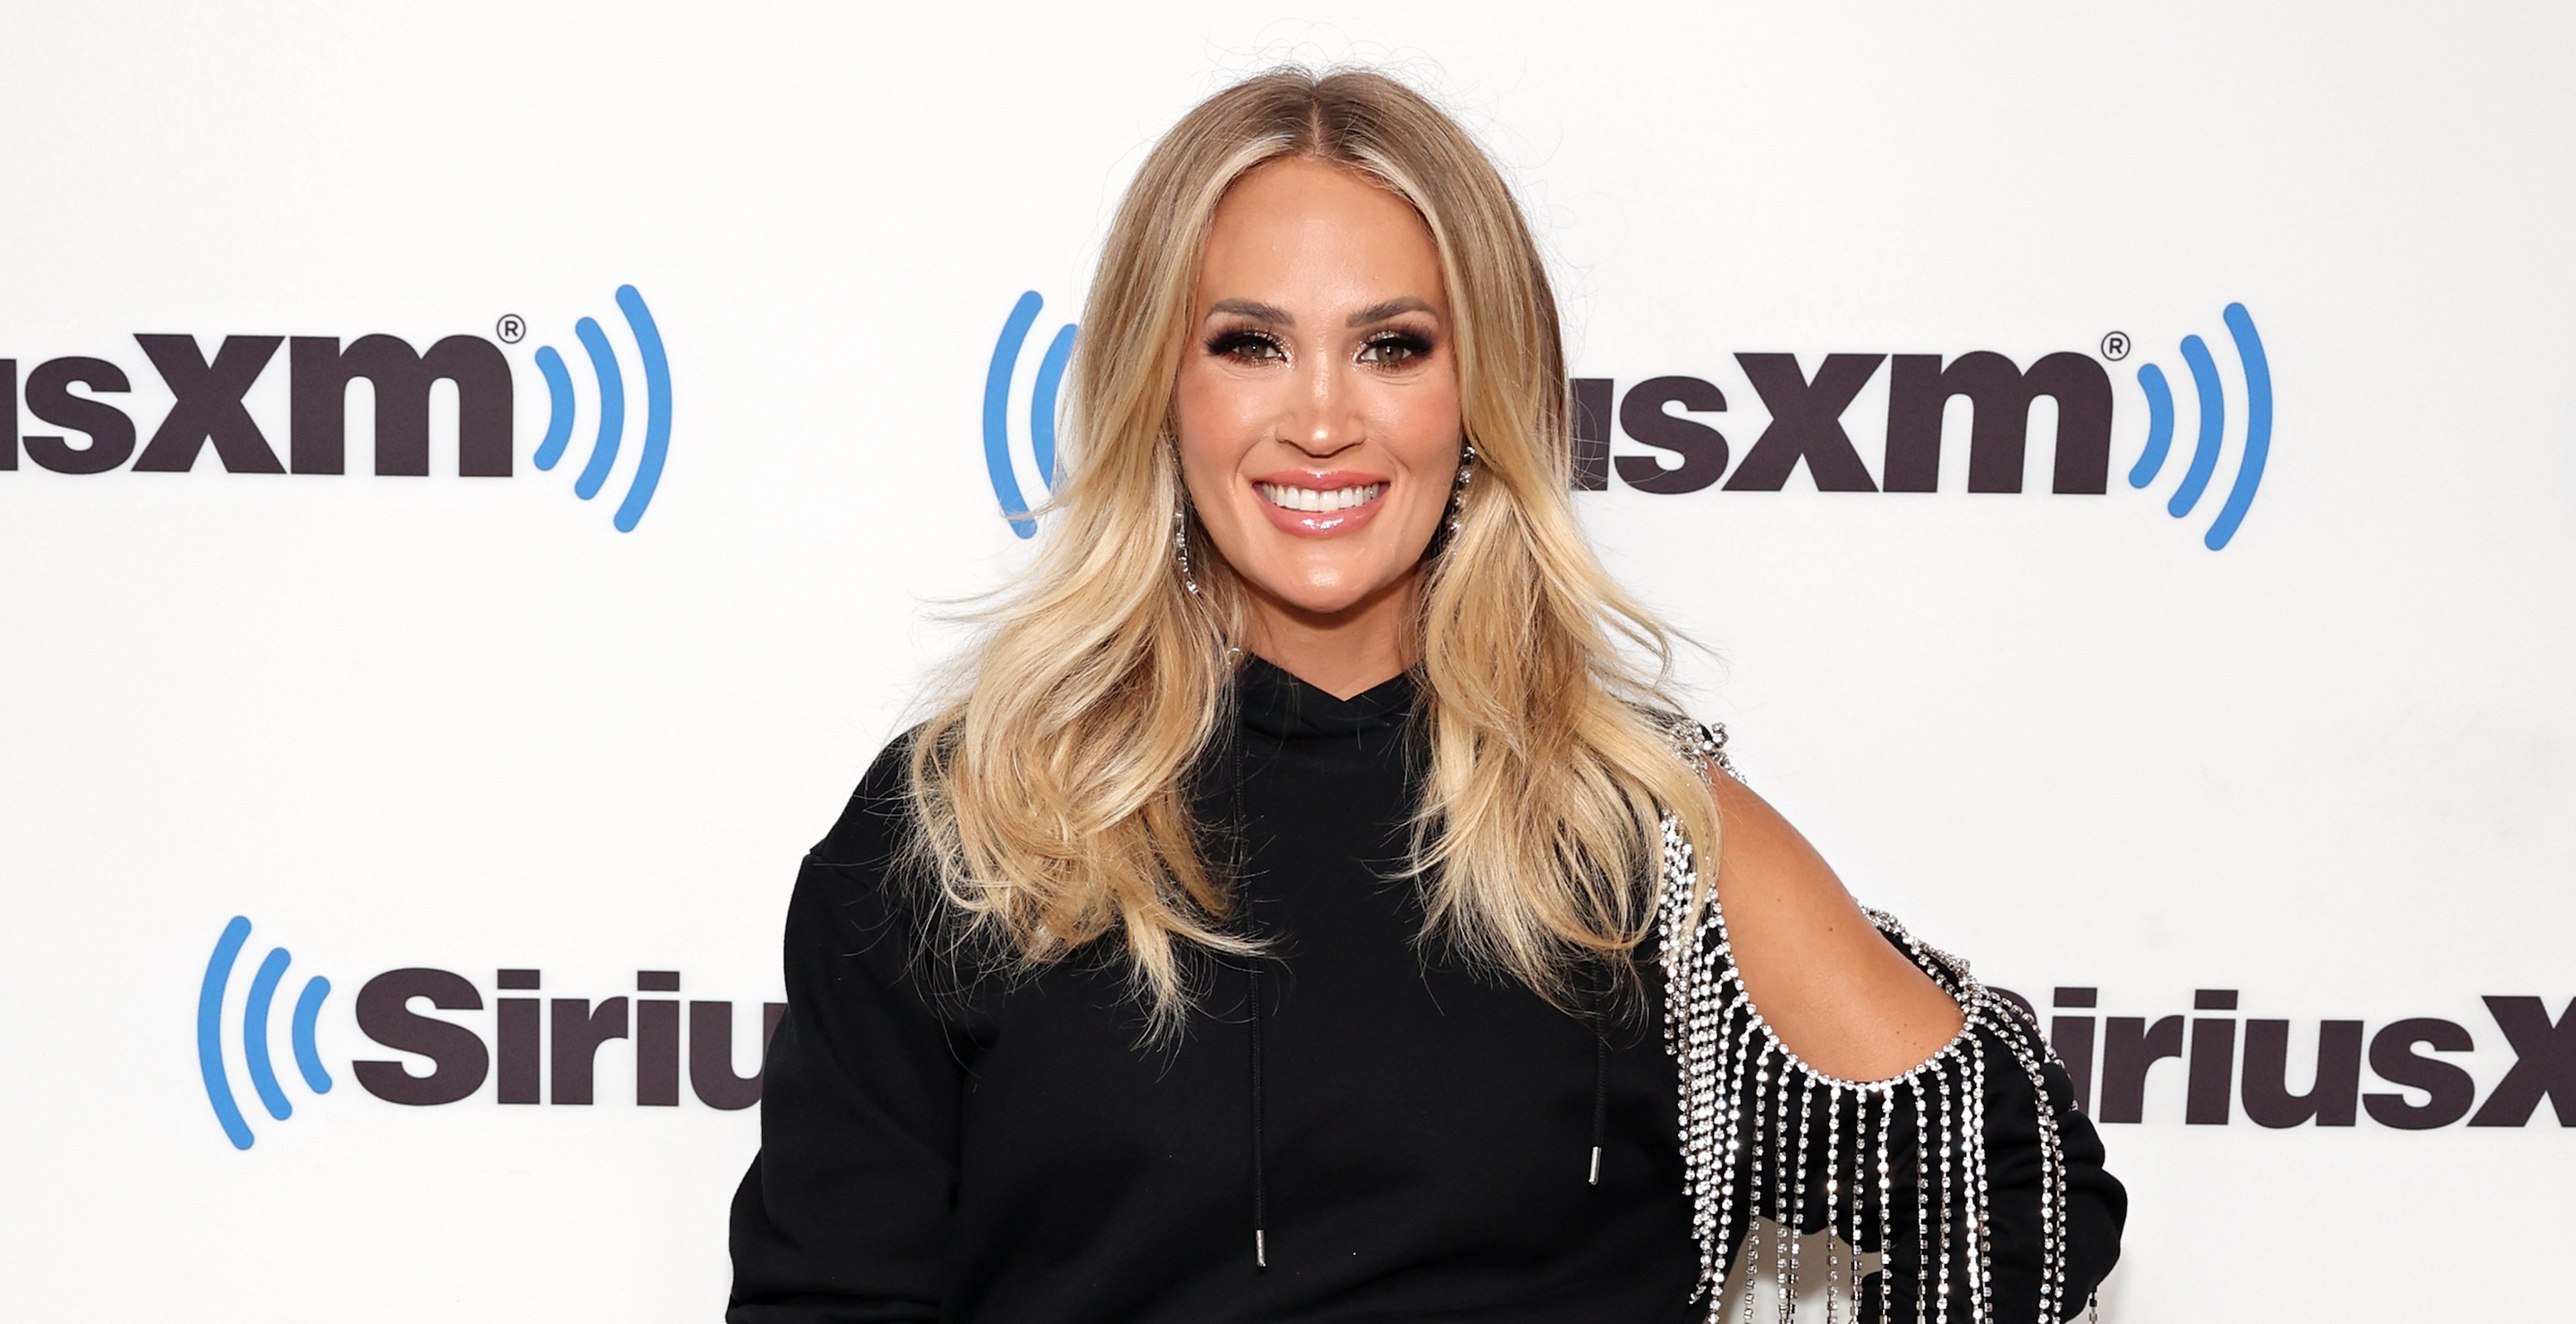 Carrie Underwood on If She'd Play the Super Bowl Halftime Show